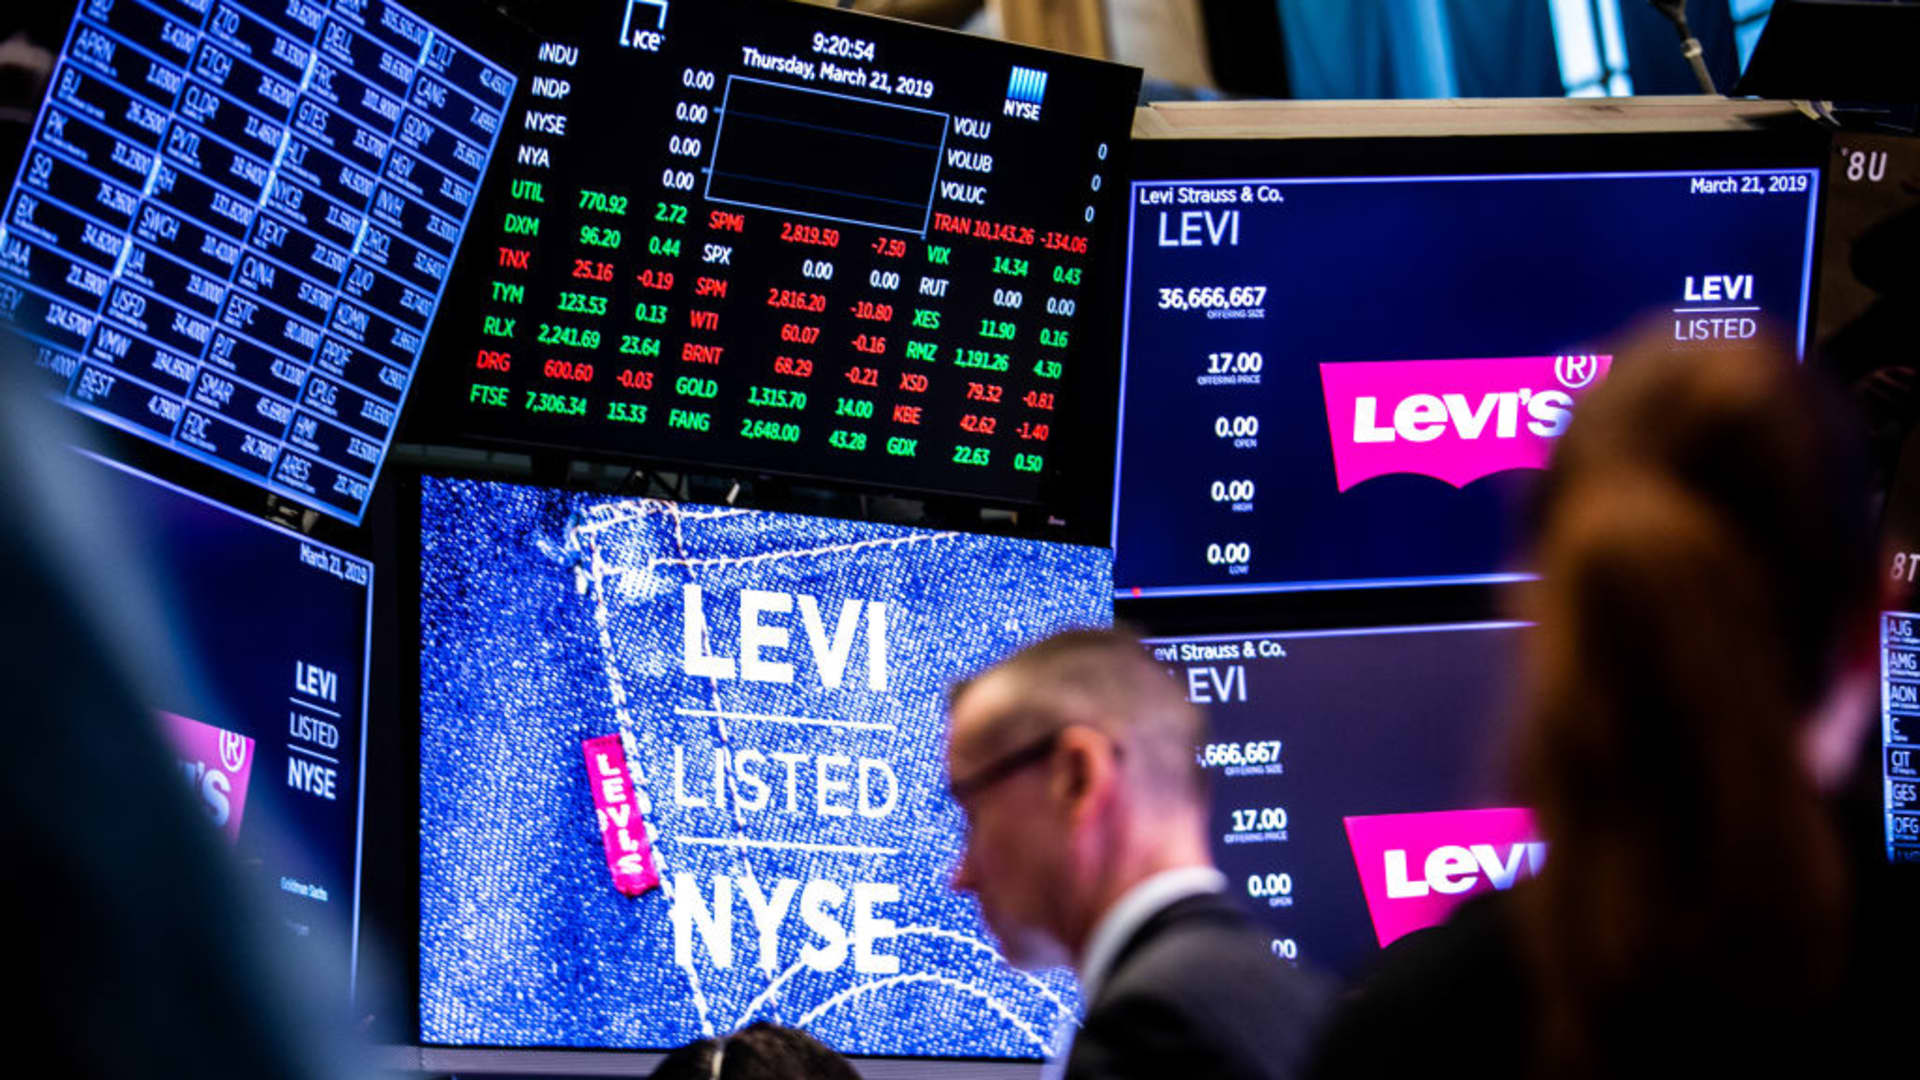 Stocks making the biggest moves premarket: Conagra, Levi Strauss, Rite Aid and others